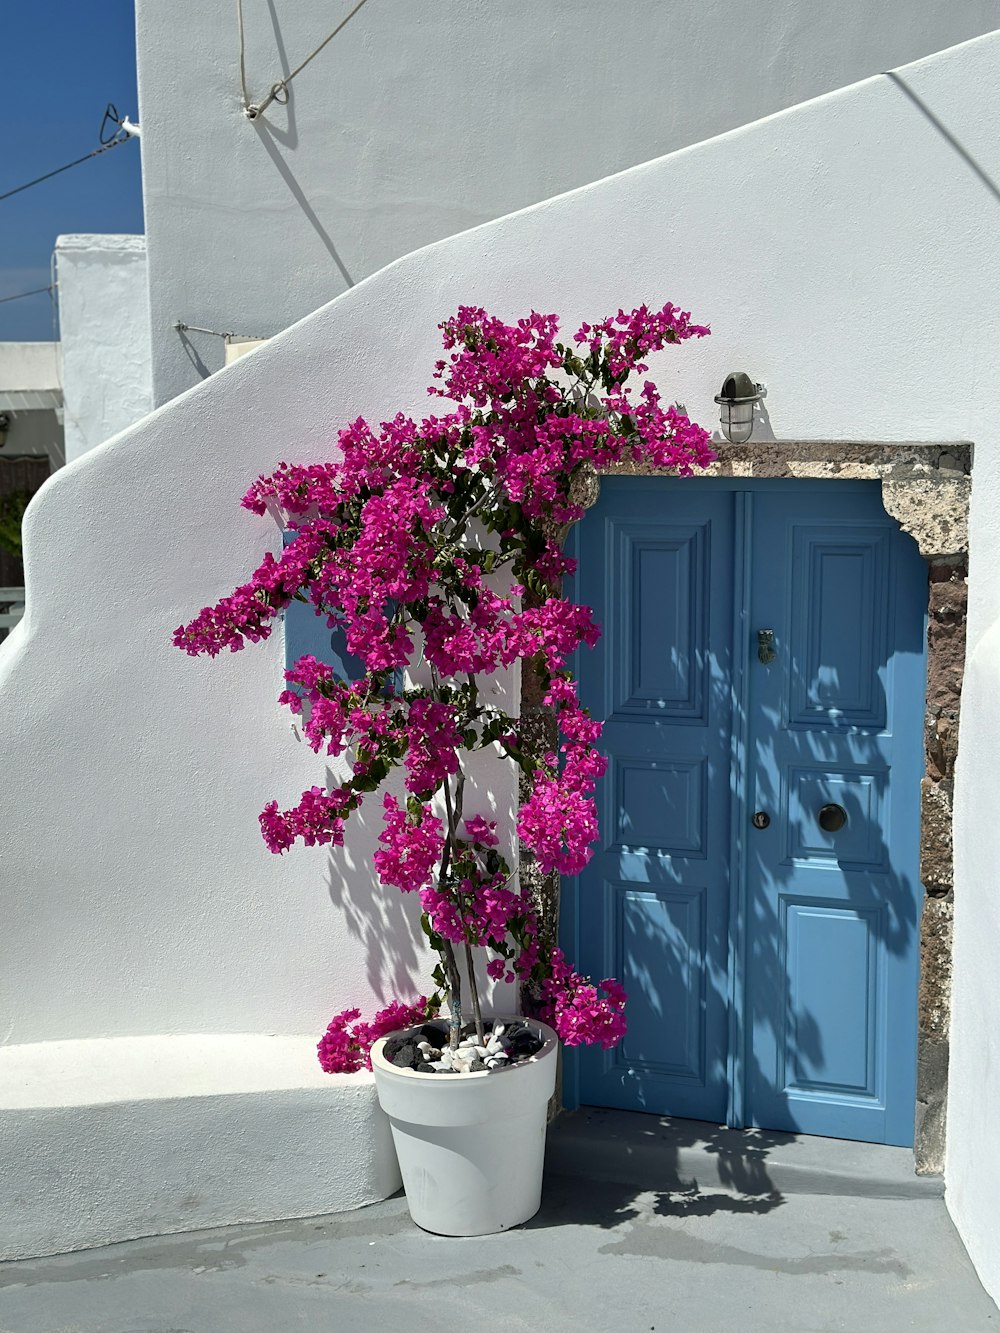 a potted plant with purple flowers in front of a blue door